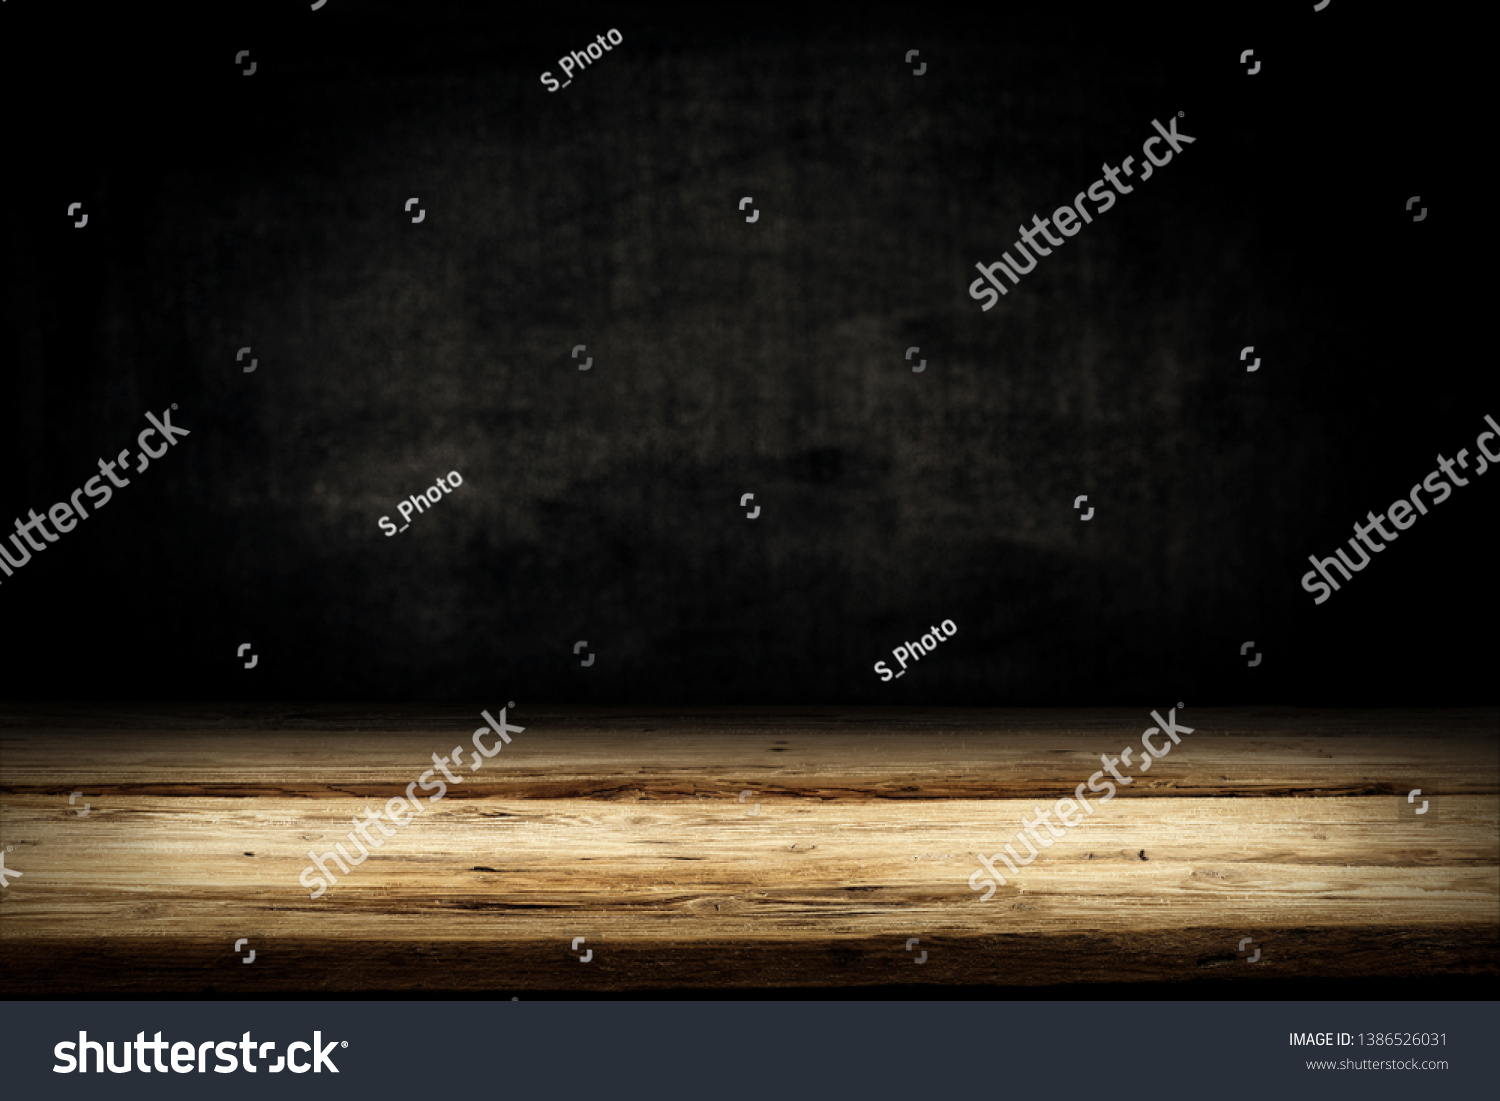 Wooden table background of free space for your decoration. Black shadow and wall of free space for your text.  #1386526031